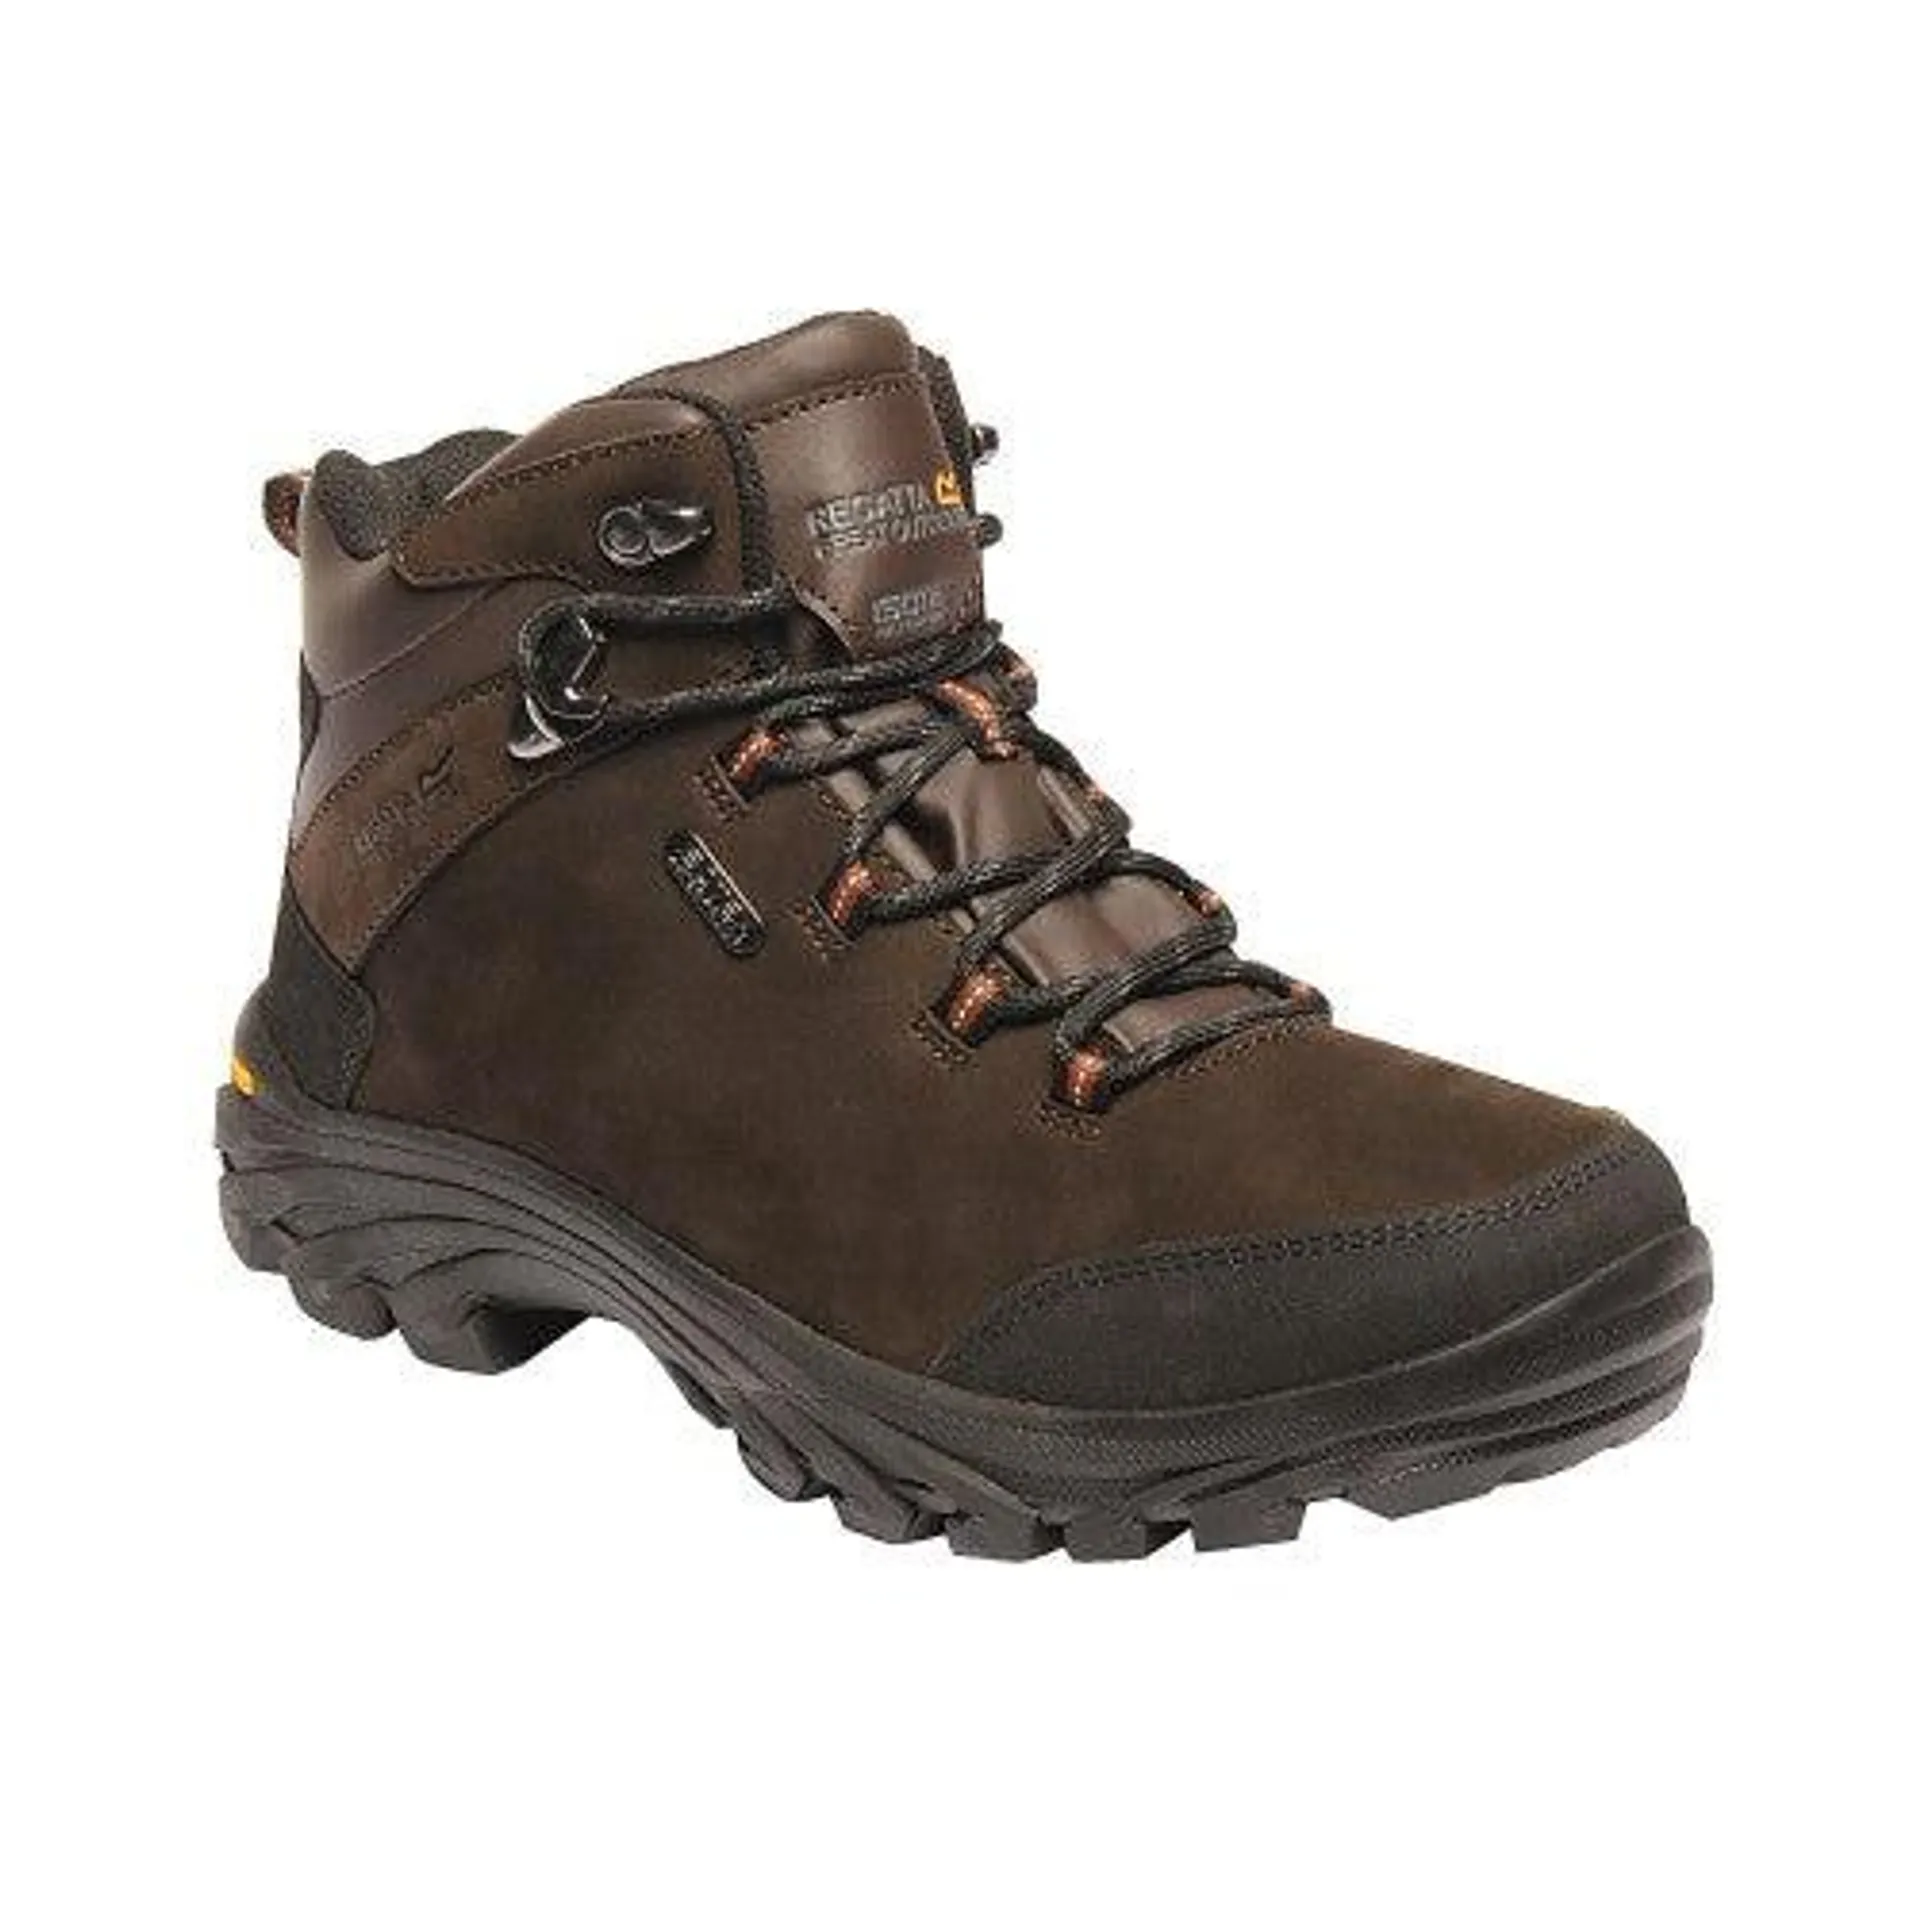 Regatta Great Outdoors Mens Burrell Leather Hiking Boots